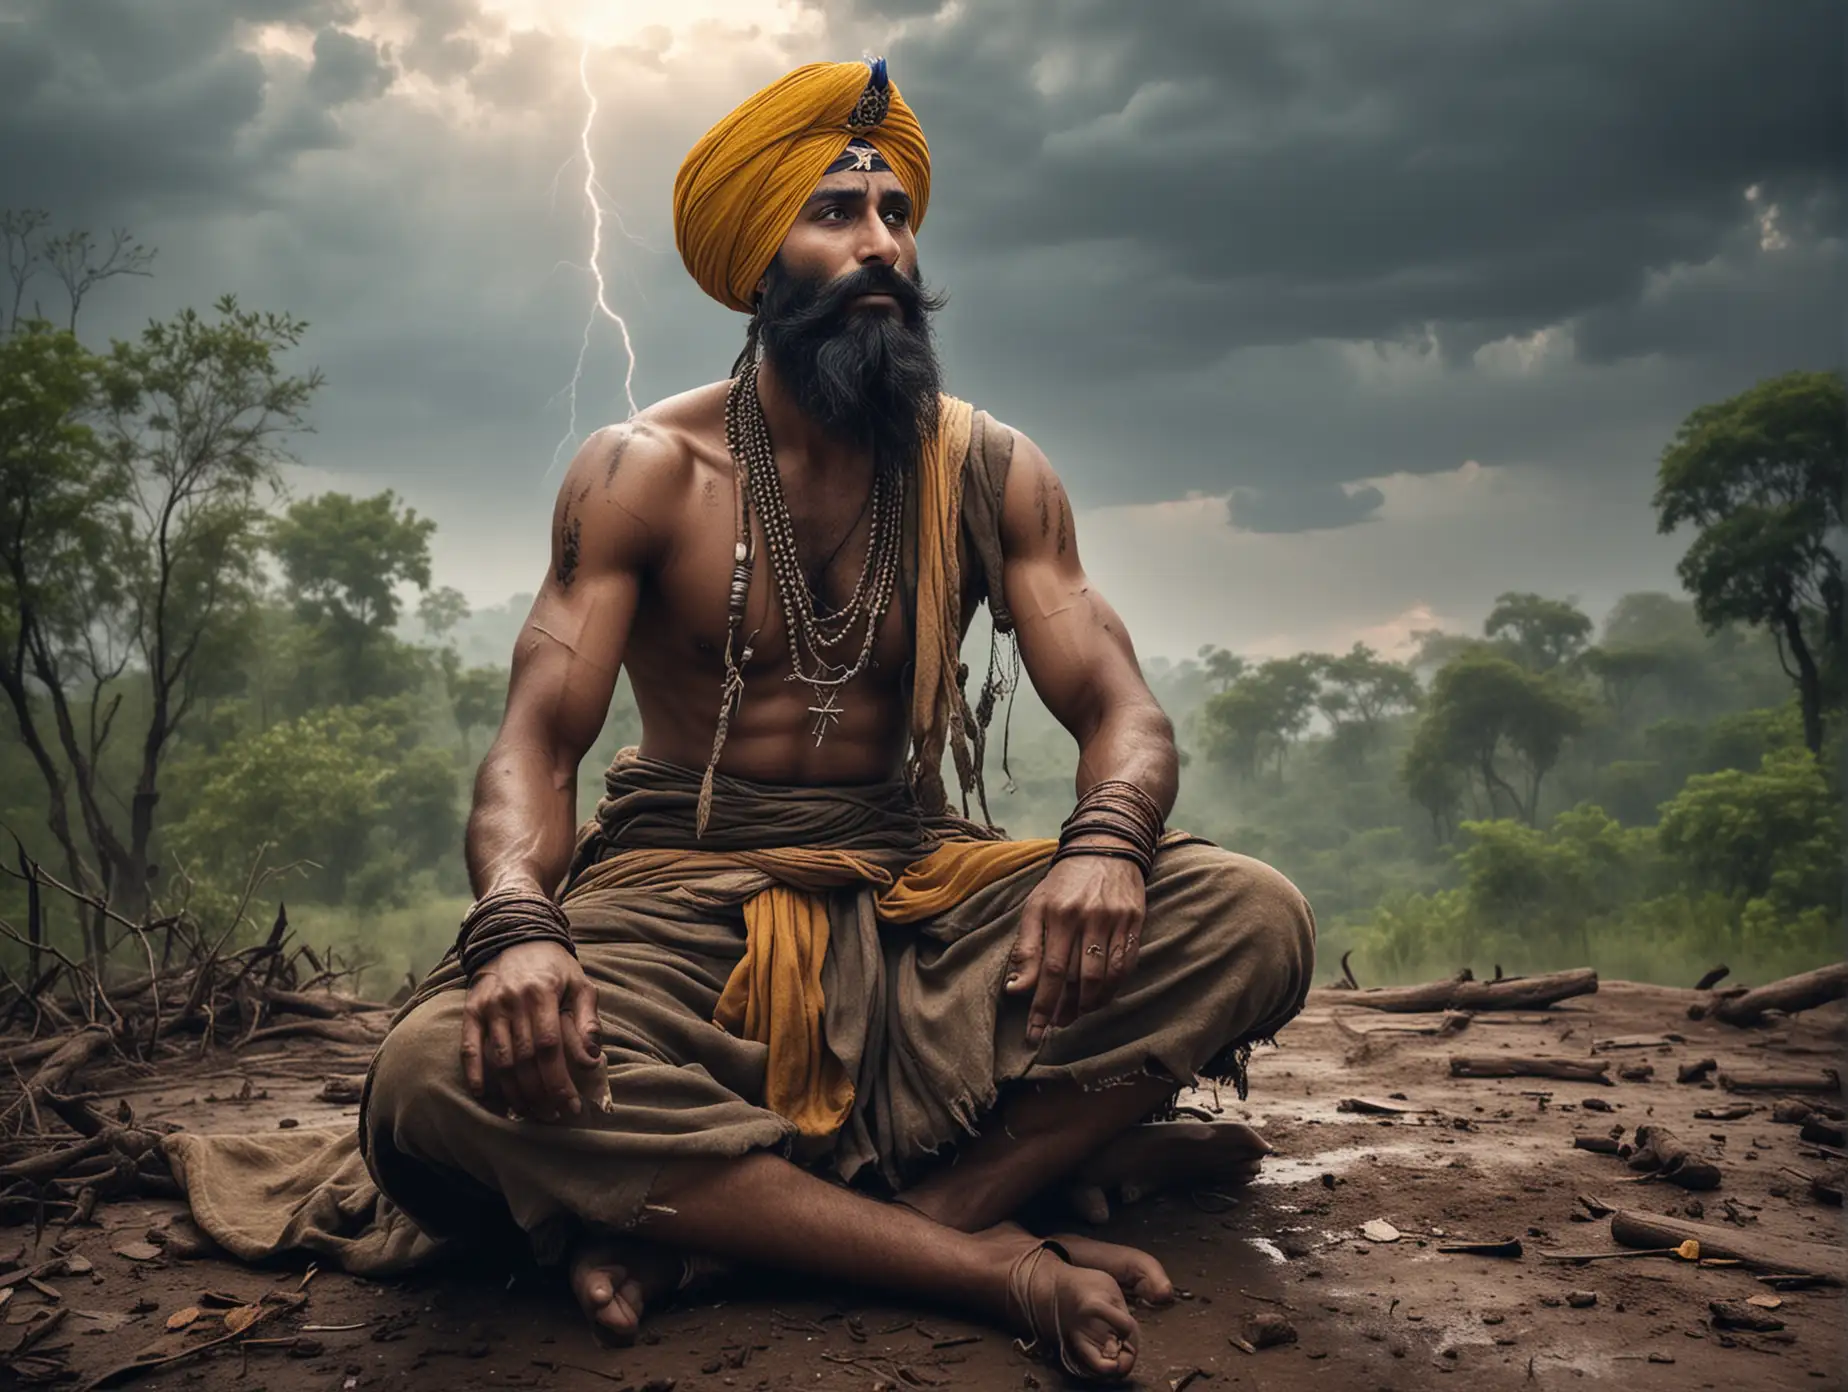 Solitary Sikh Warrior in Tattered Clothing Contemplates Stormy Horizon